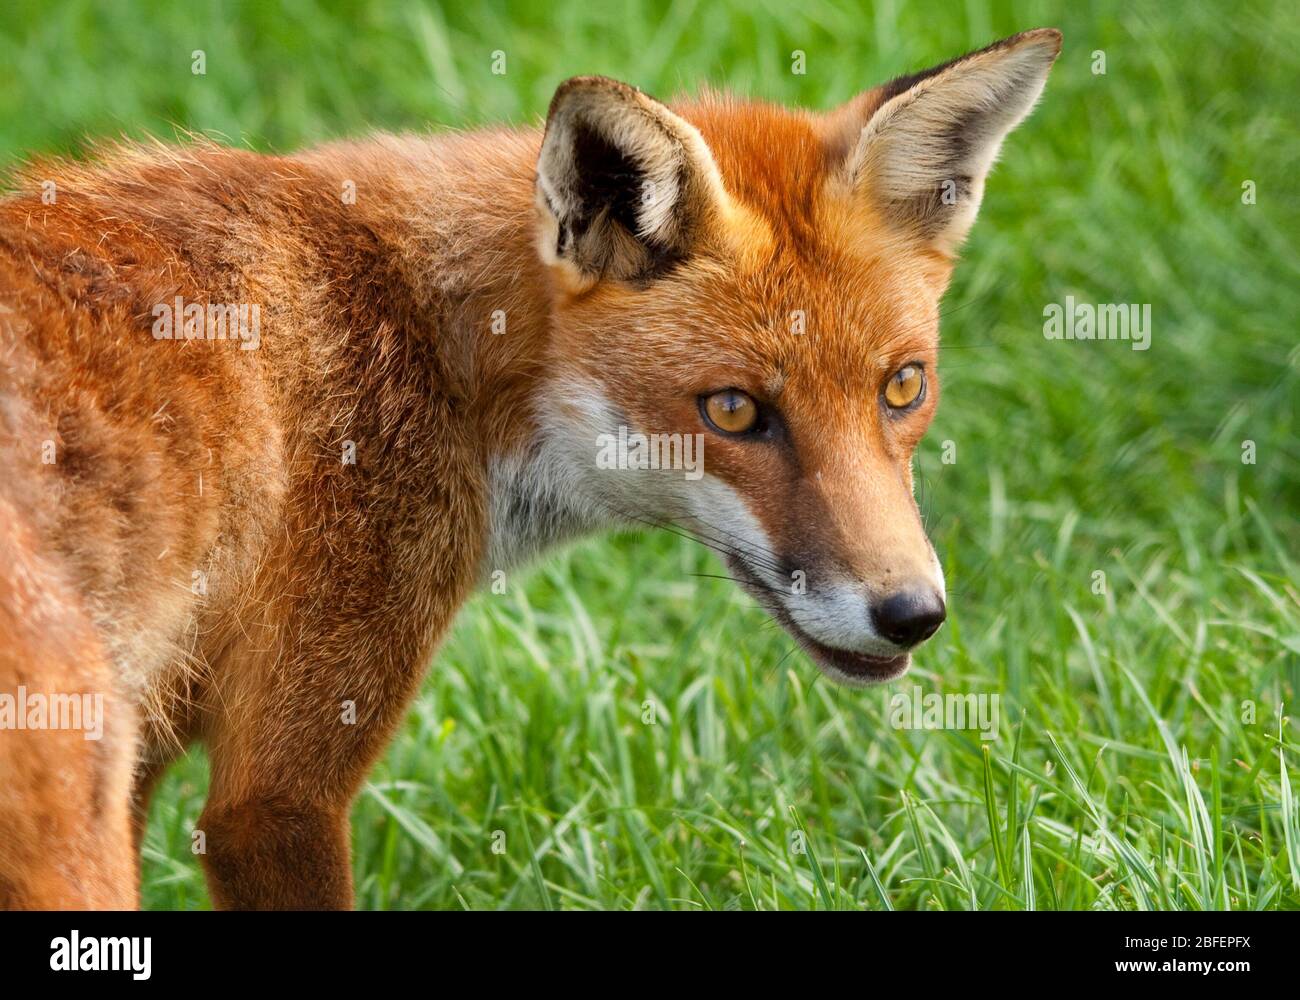 Fox Vulpes vulpes red brown fur white underside throat chin and inside ears black on ears and legs forward looking eyes dog like pointed  muzzle Stock Photo